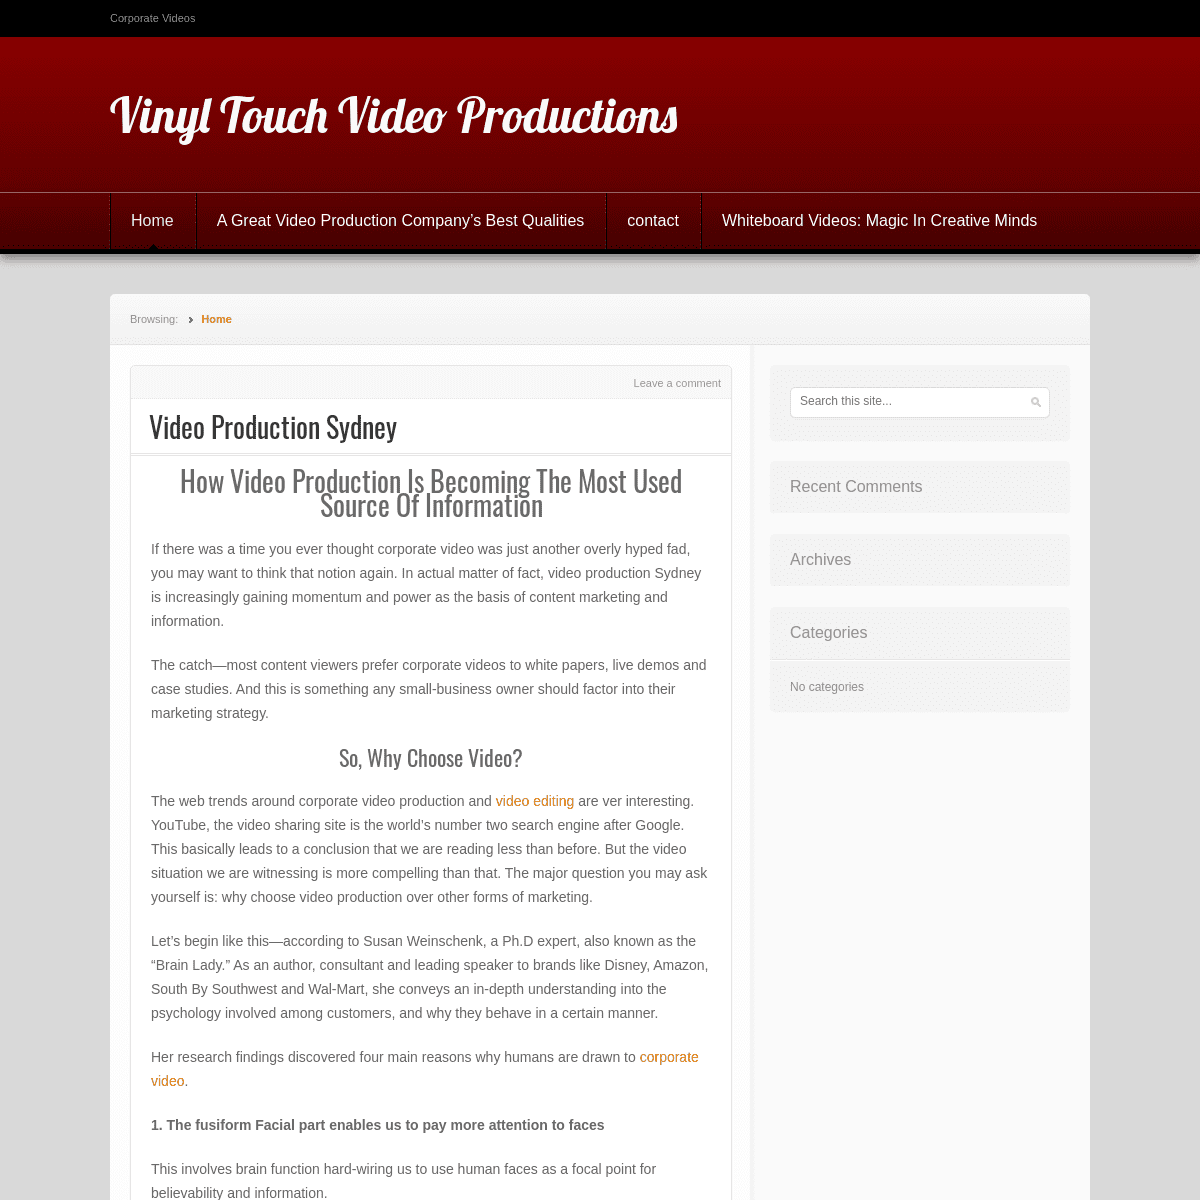 A complete backup of https://vinyltouchproductions.com